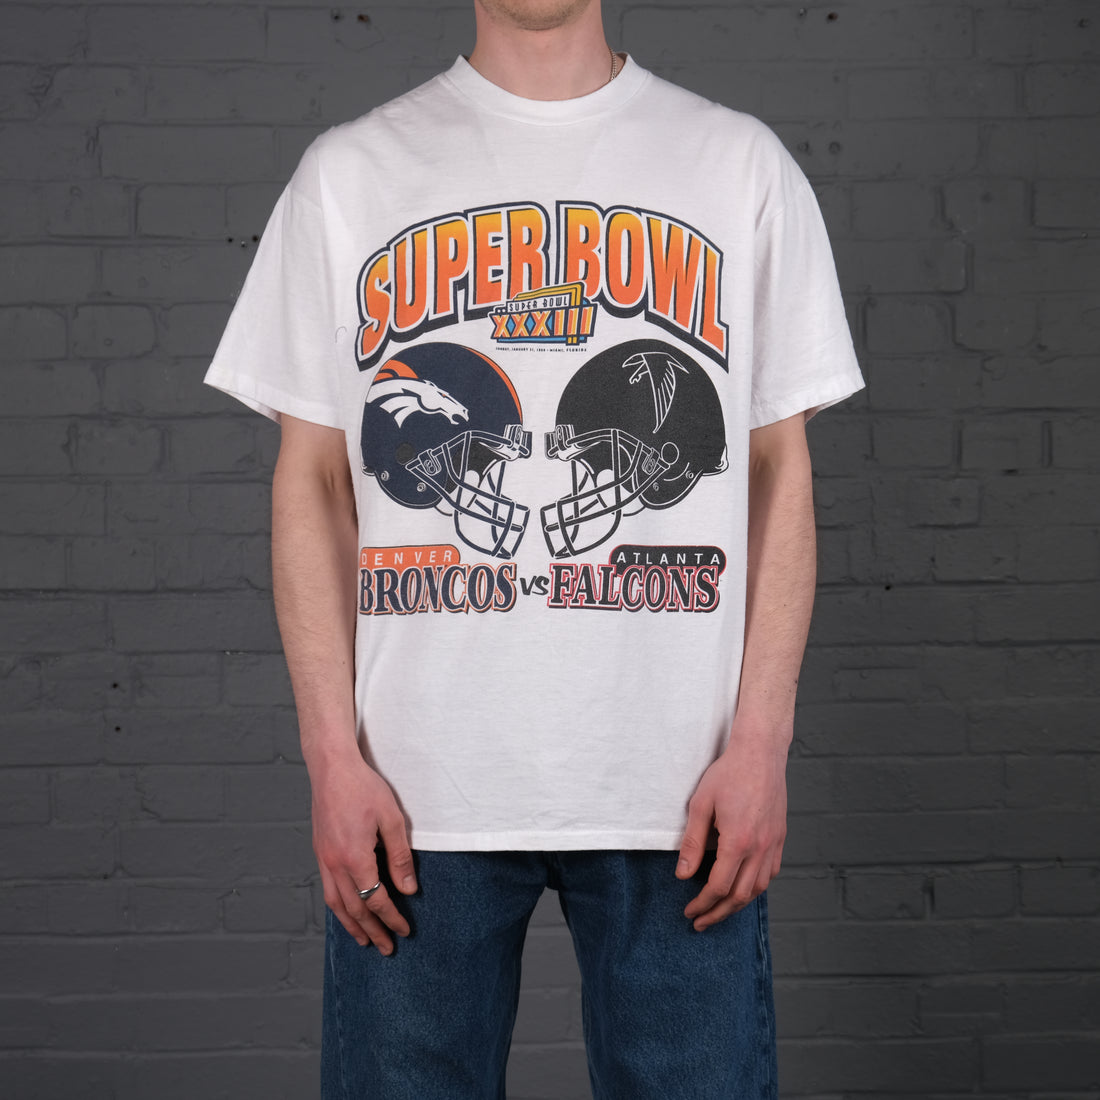 Vintage Super Bowl graphic t-shirt in White